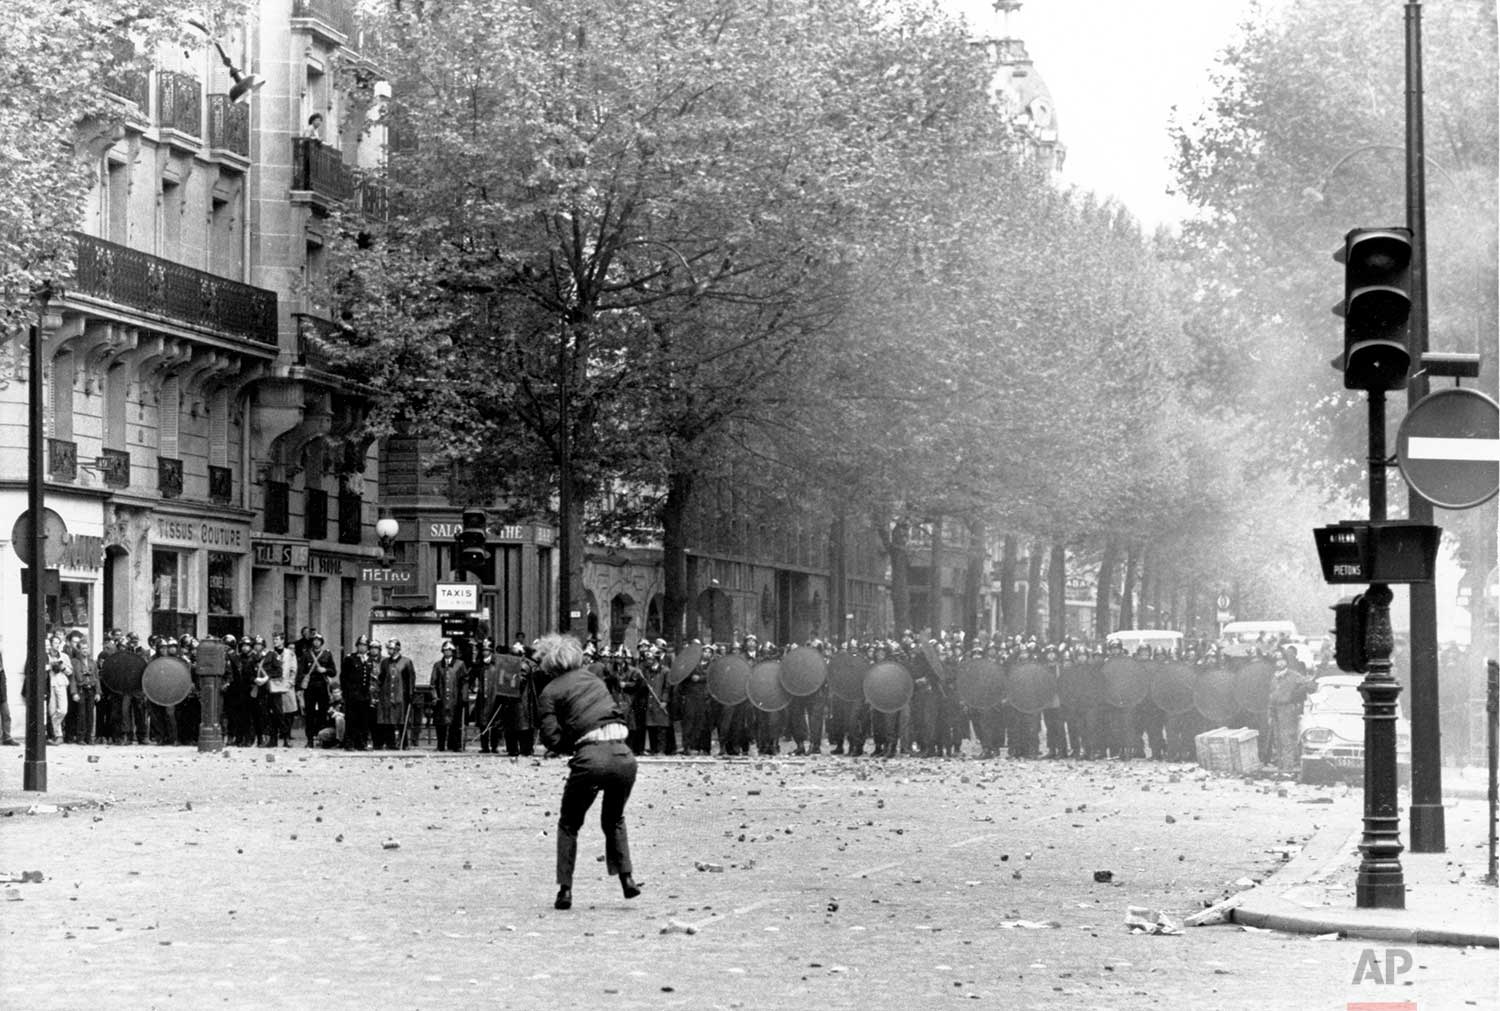 May 1968 student protests in France — AP Photos